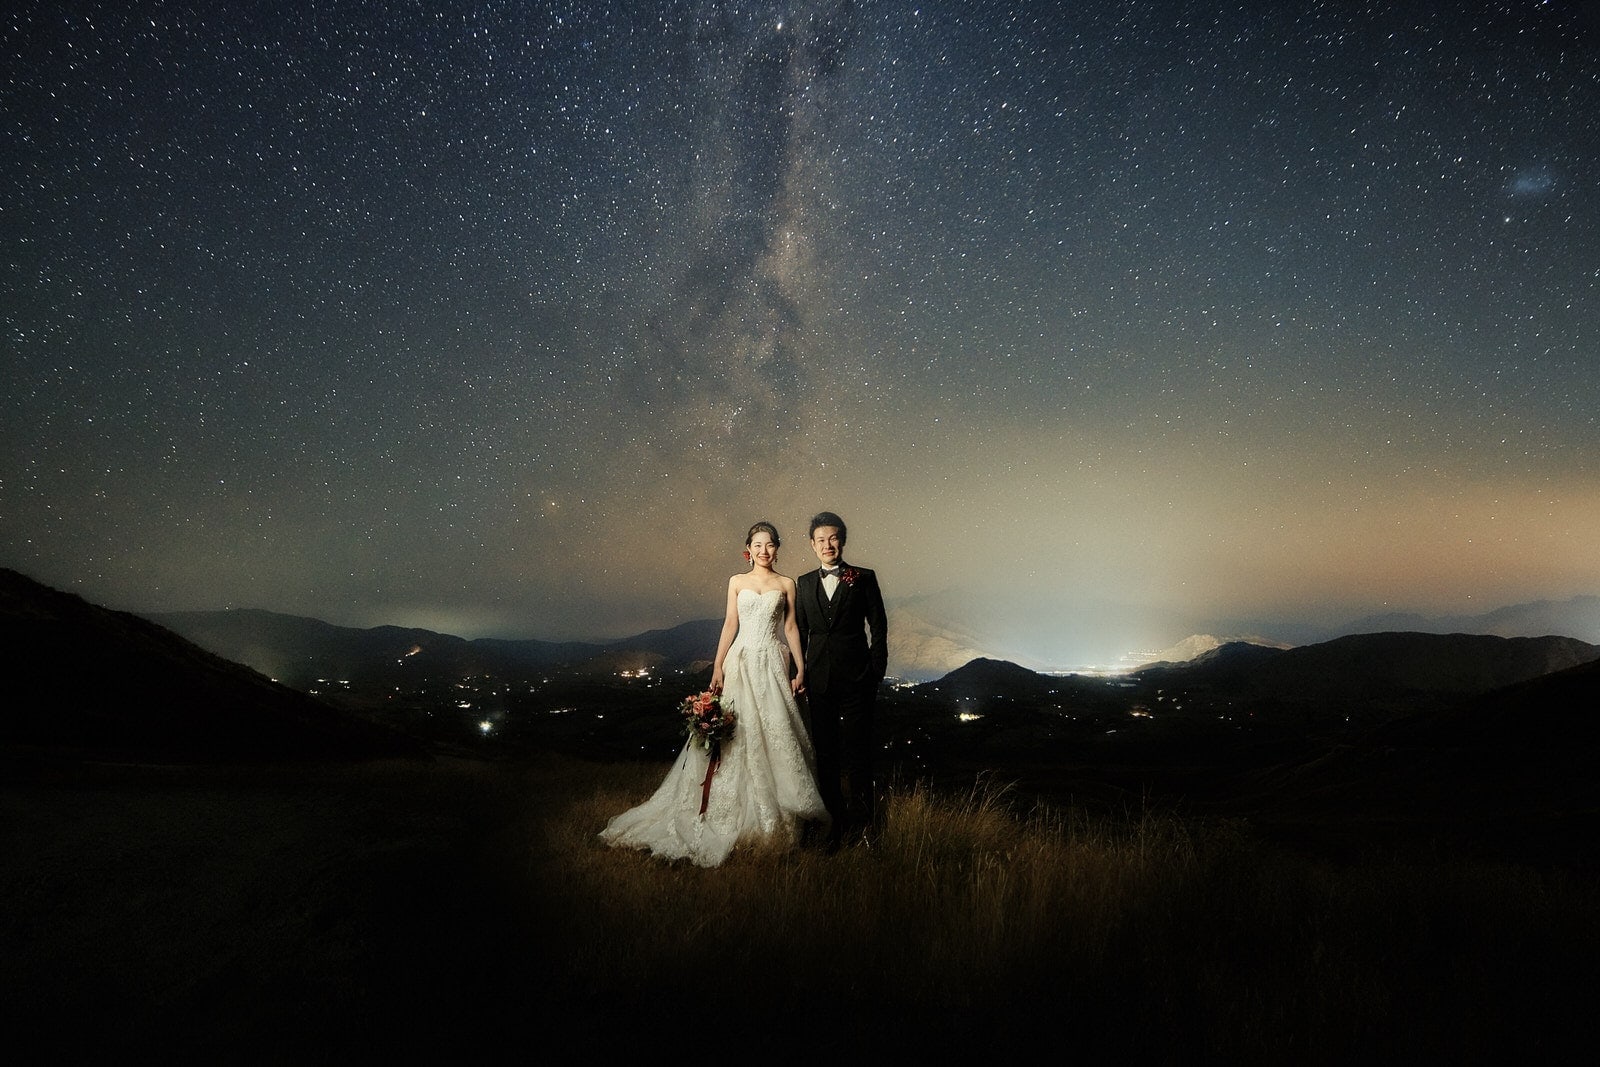 Queenstown New Zealand Elopement Wedding Photographer - A starry night shoot capturing a bride and groom under the mesmerizing Milky Way, adding a stunning addition to our portfolio.